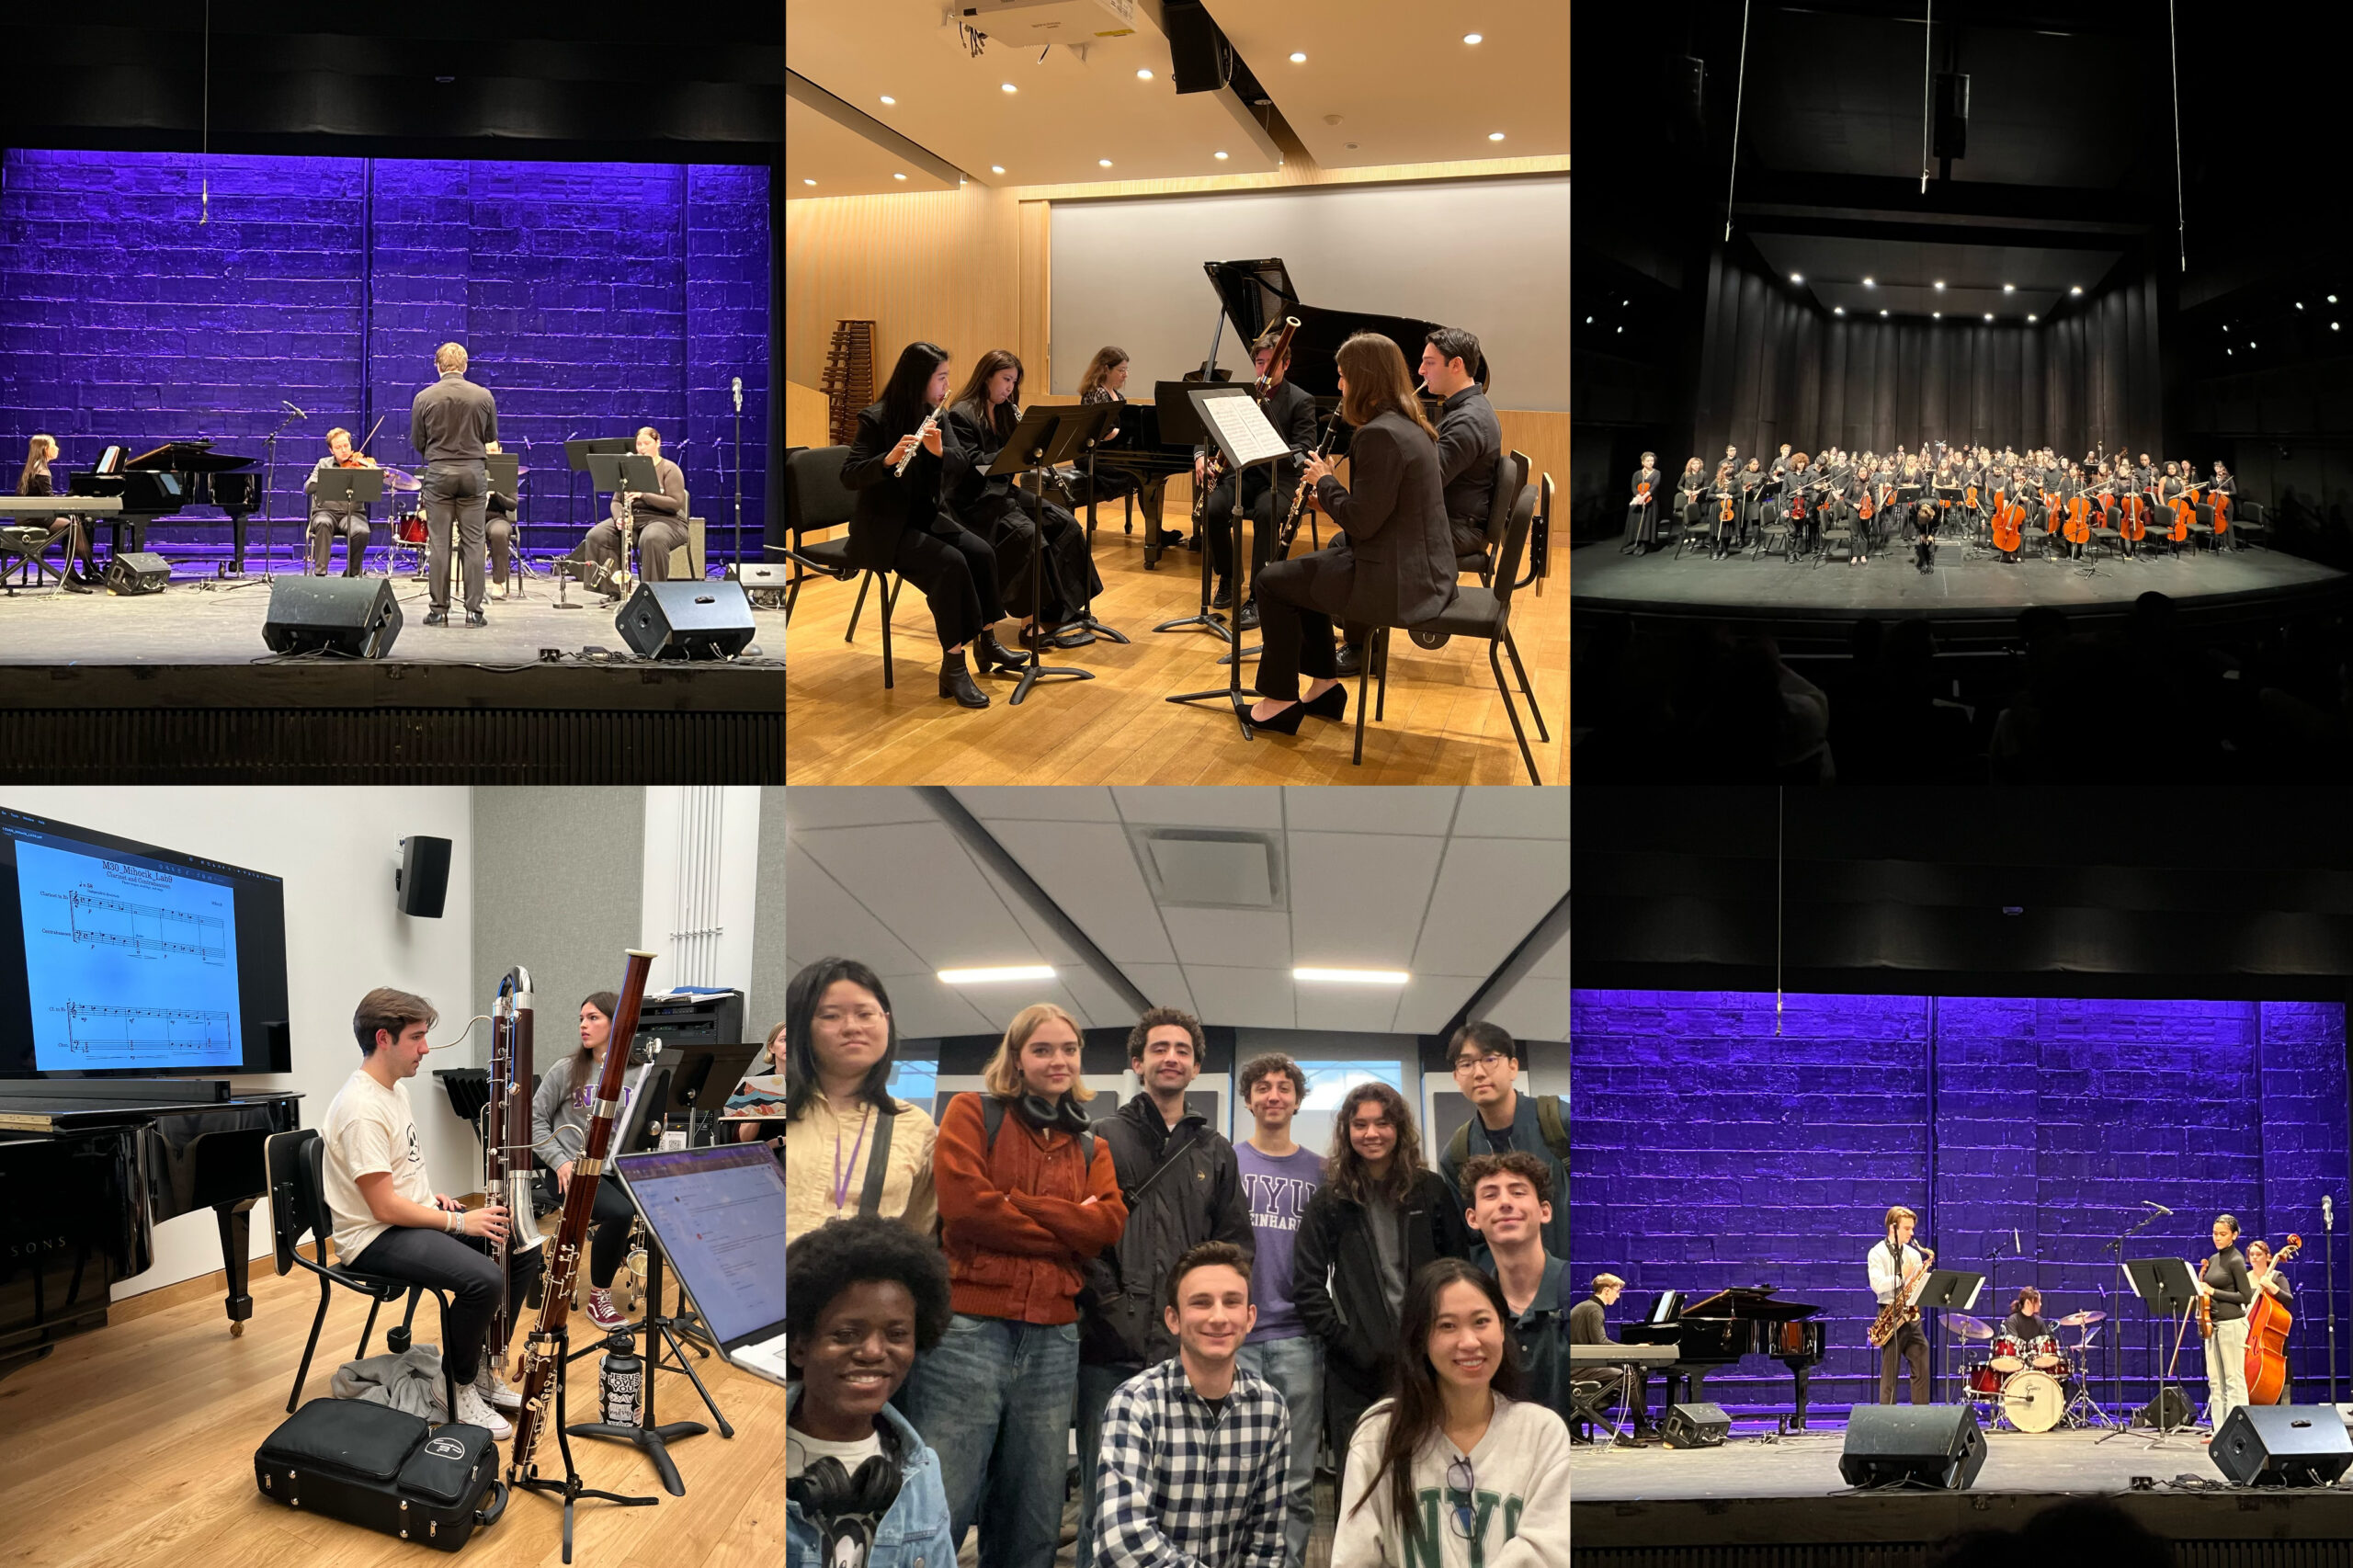 A collage of students in classrooms and onstage performing and studying music.